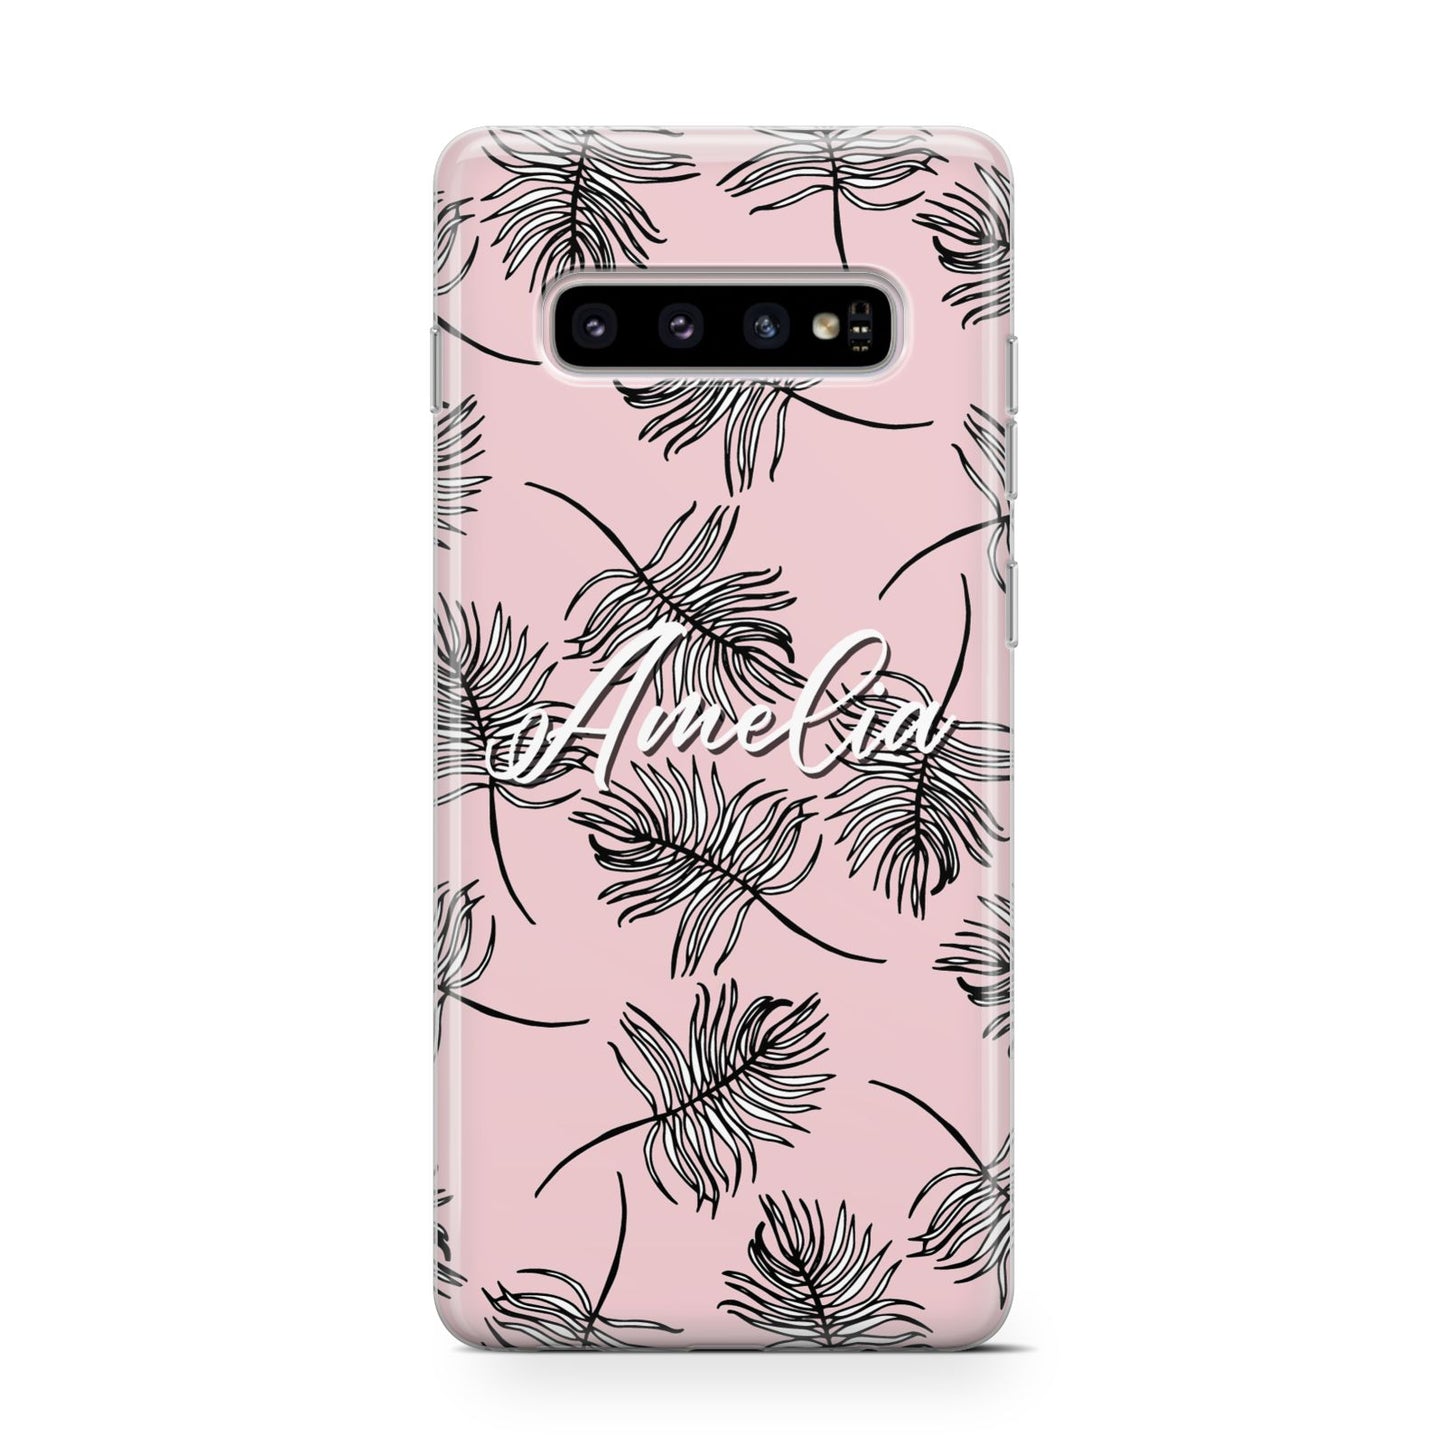 Personalised Pink Monochrome Tropical Leaf Samsung Galaxy S10 Case